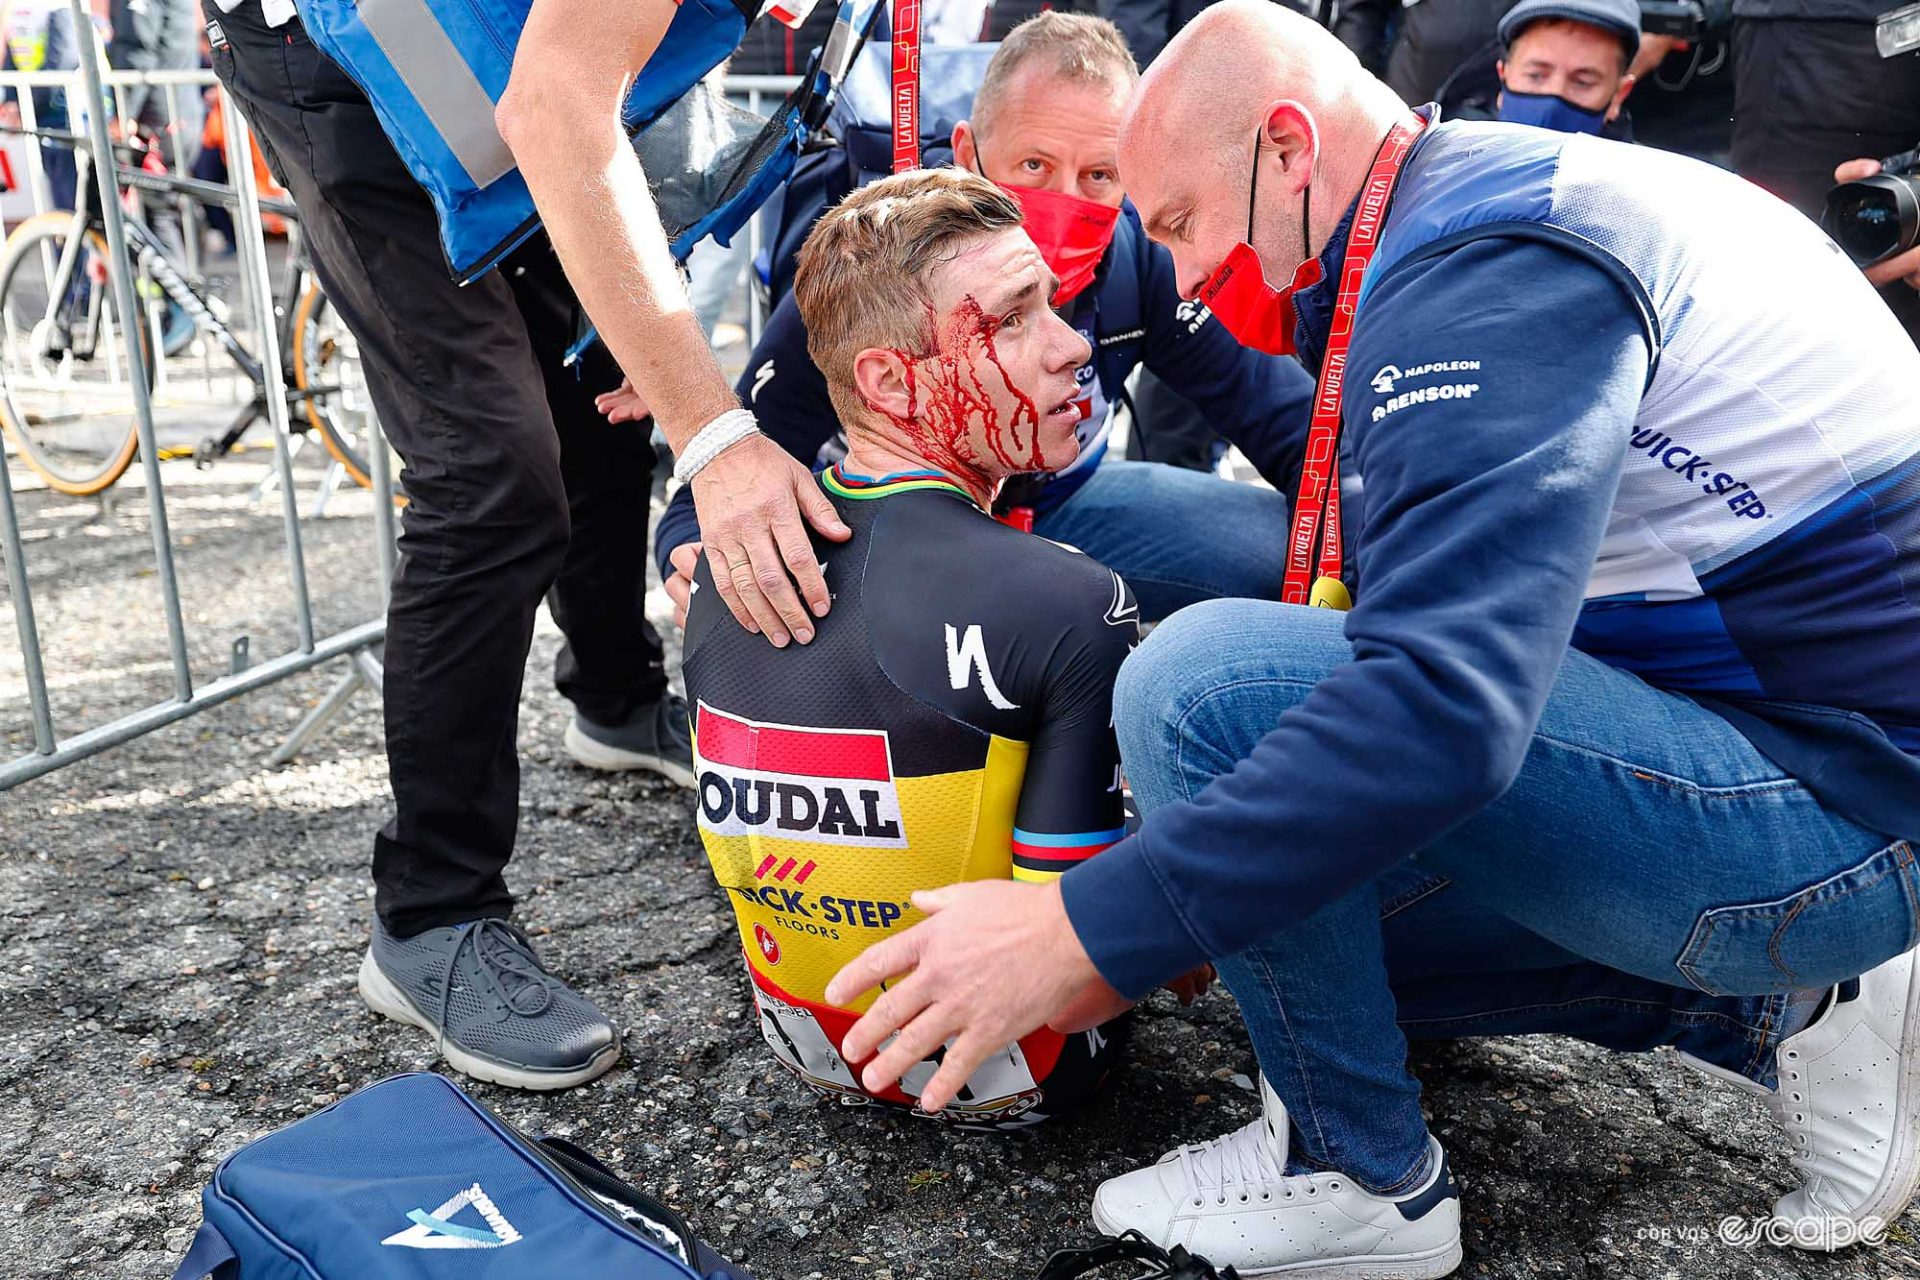 Evenepoel sitting on the ground at the end of stage 3, surrounded by team staff. He has blood all down the side of his face after crashing. 